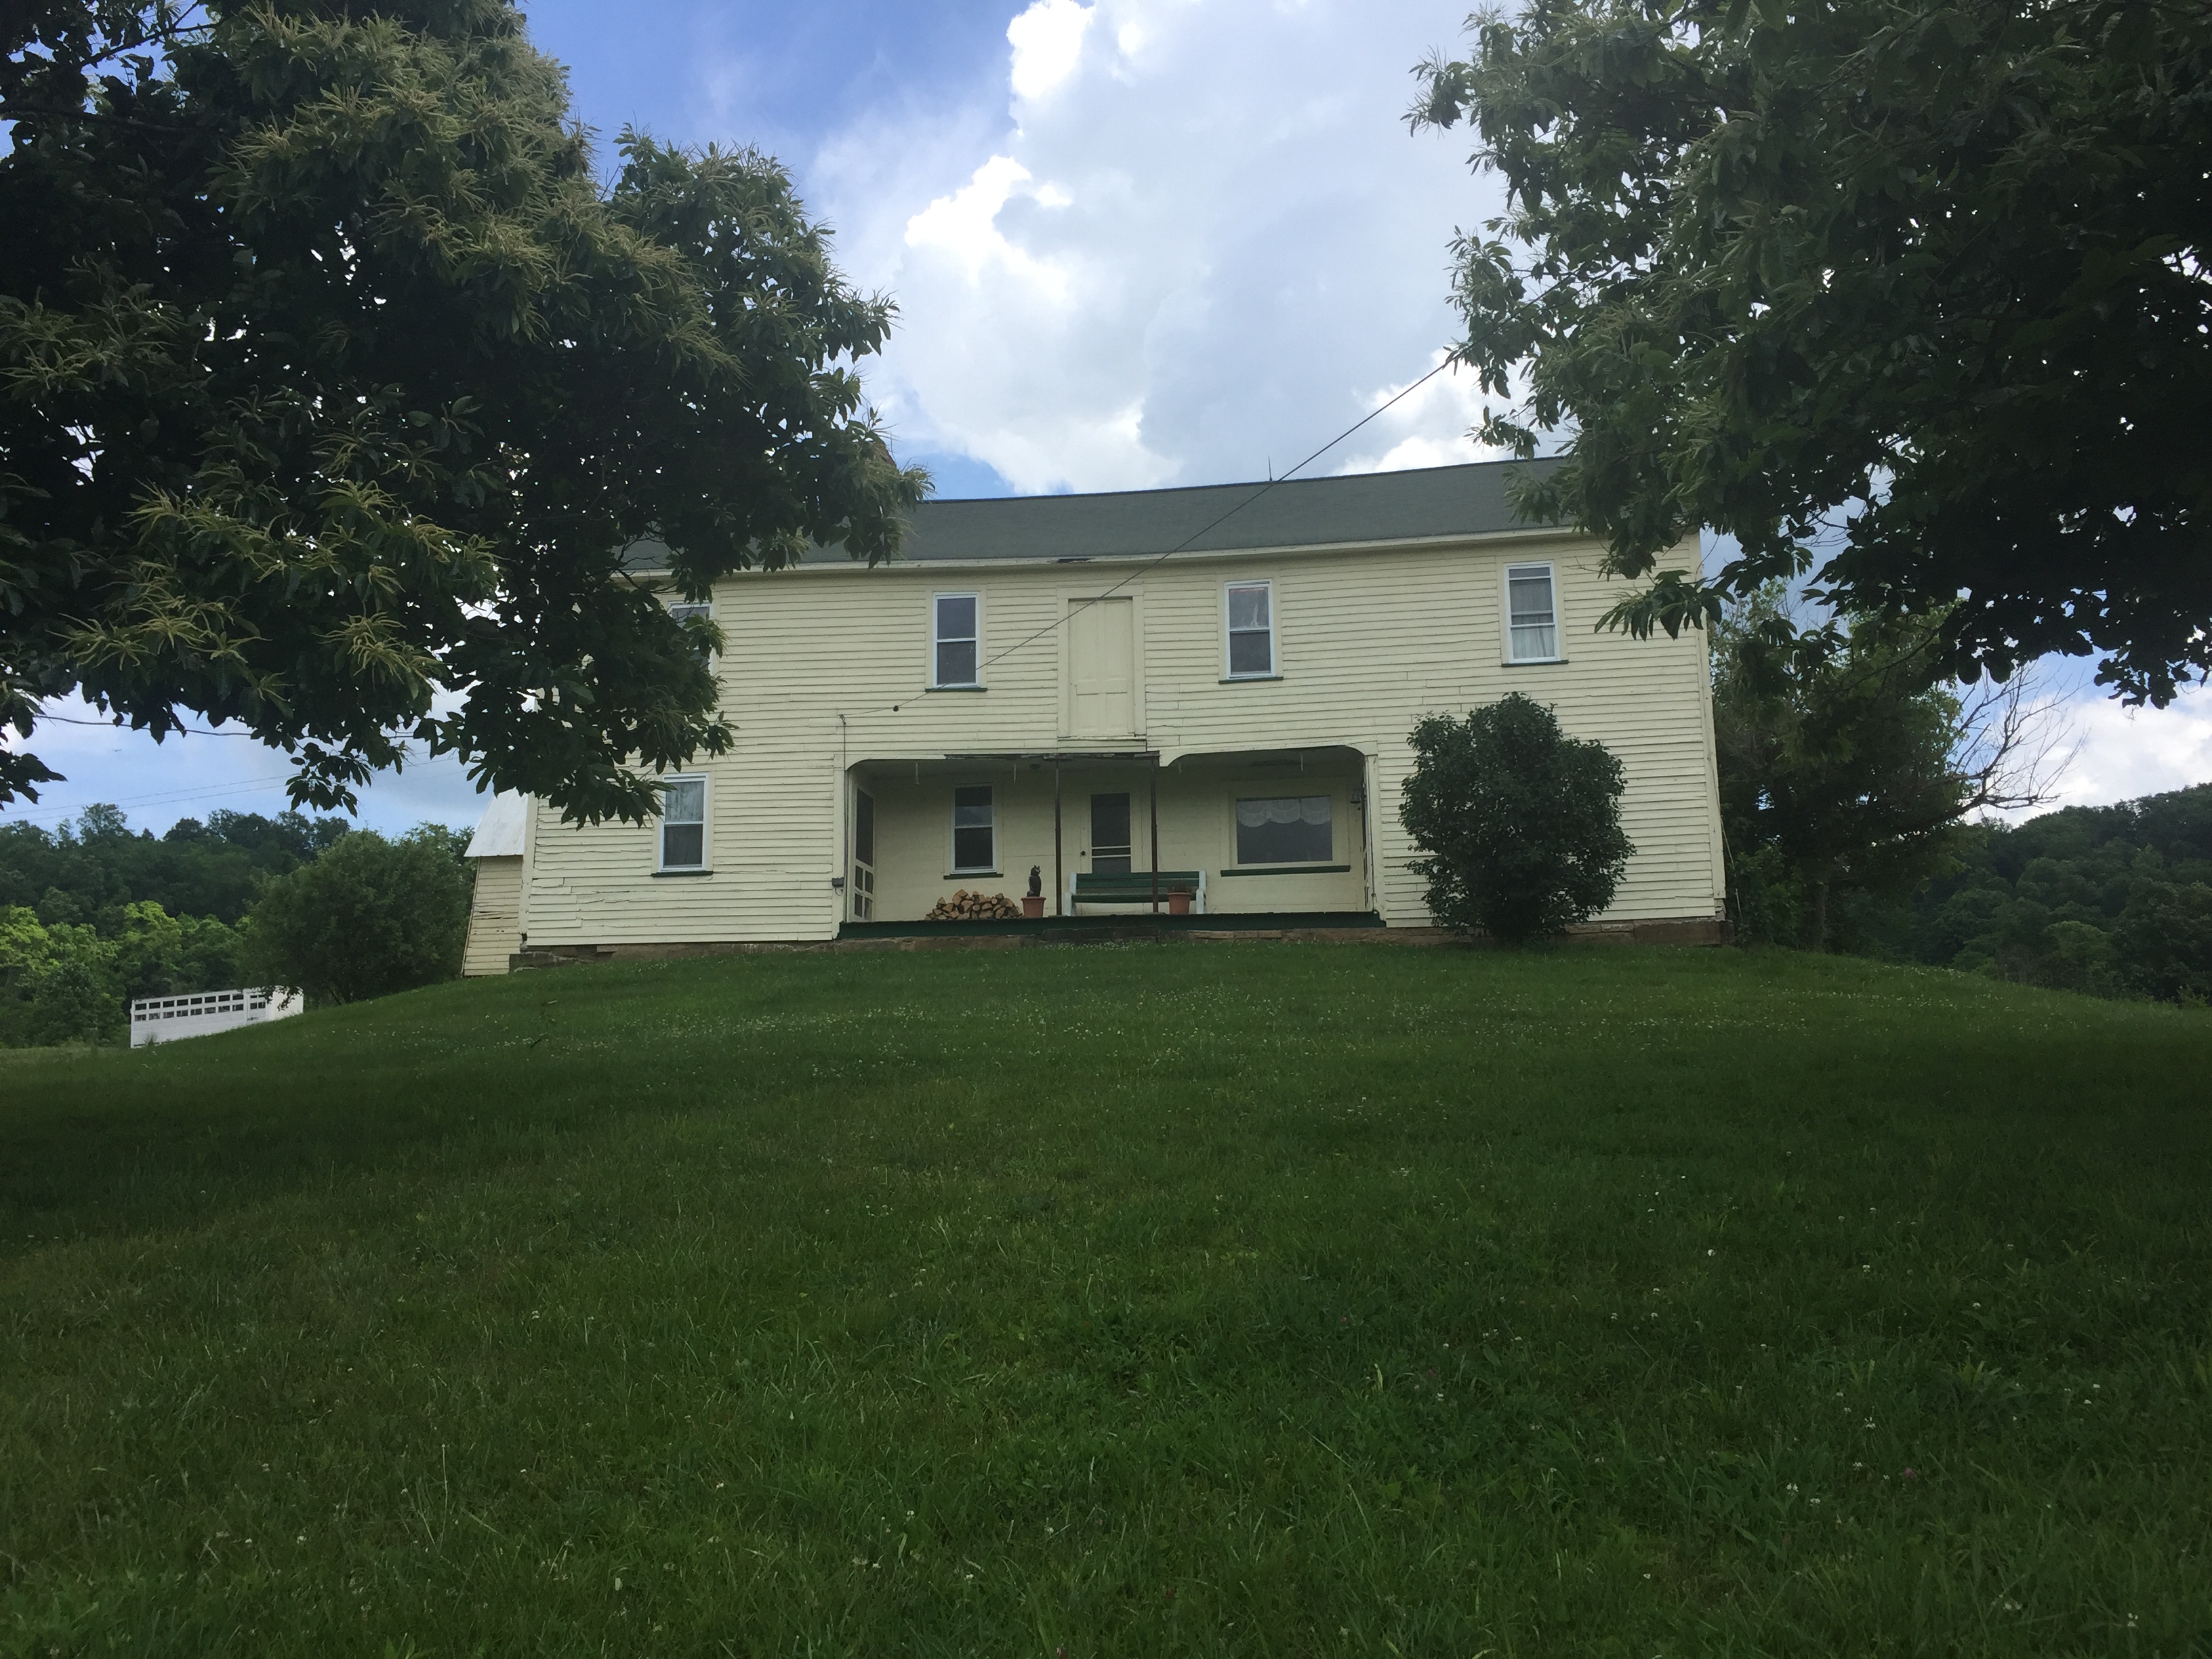 Ephraim Cutler's house still stands 218 years after it was built and is currently owned by Glen and Sue Hazen of Athens, Ohio. The property is known as Kickwheel Acres and is a family farm. Photo by J Hazen on June 12, 2017.